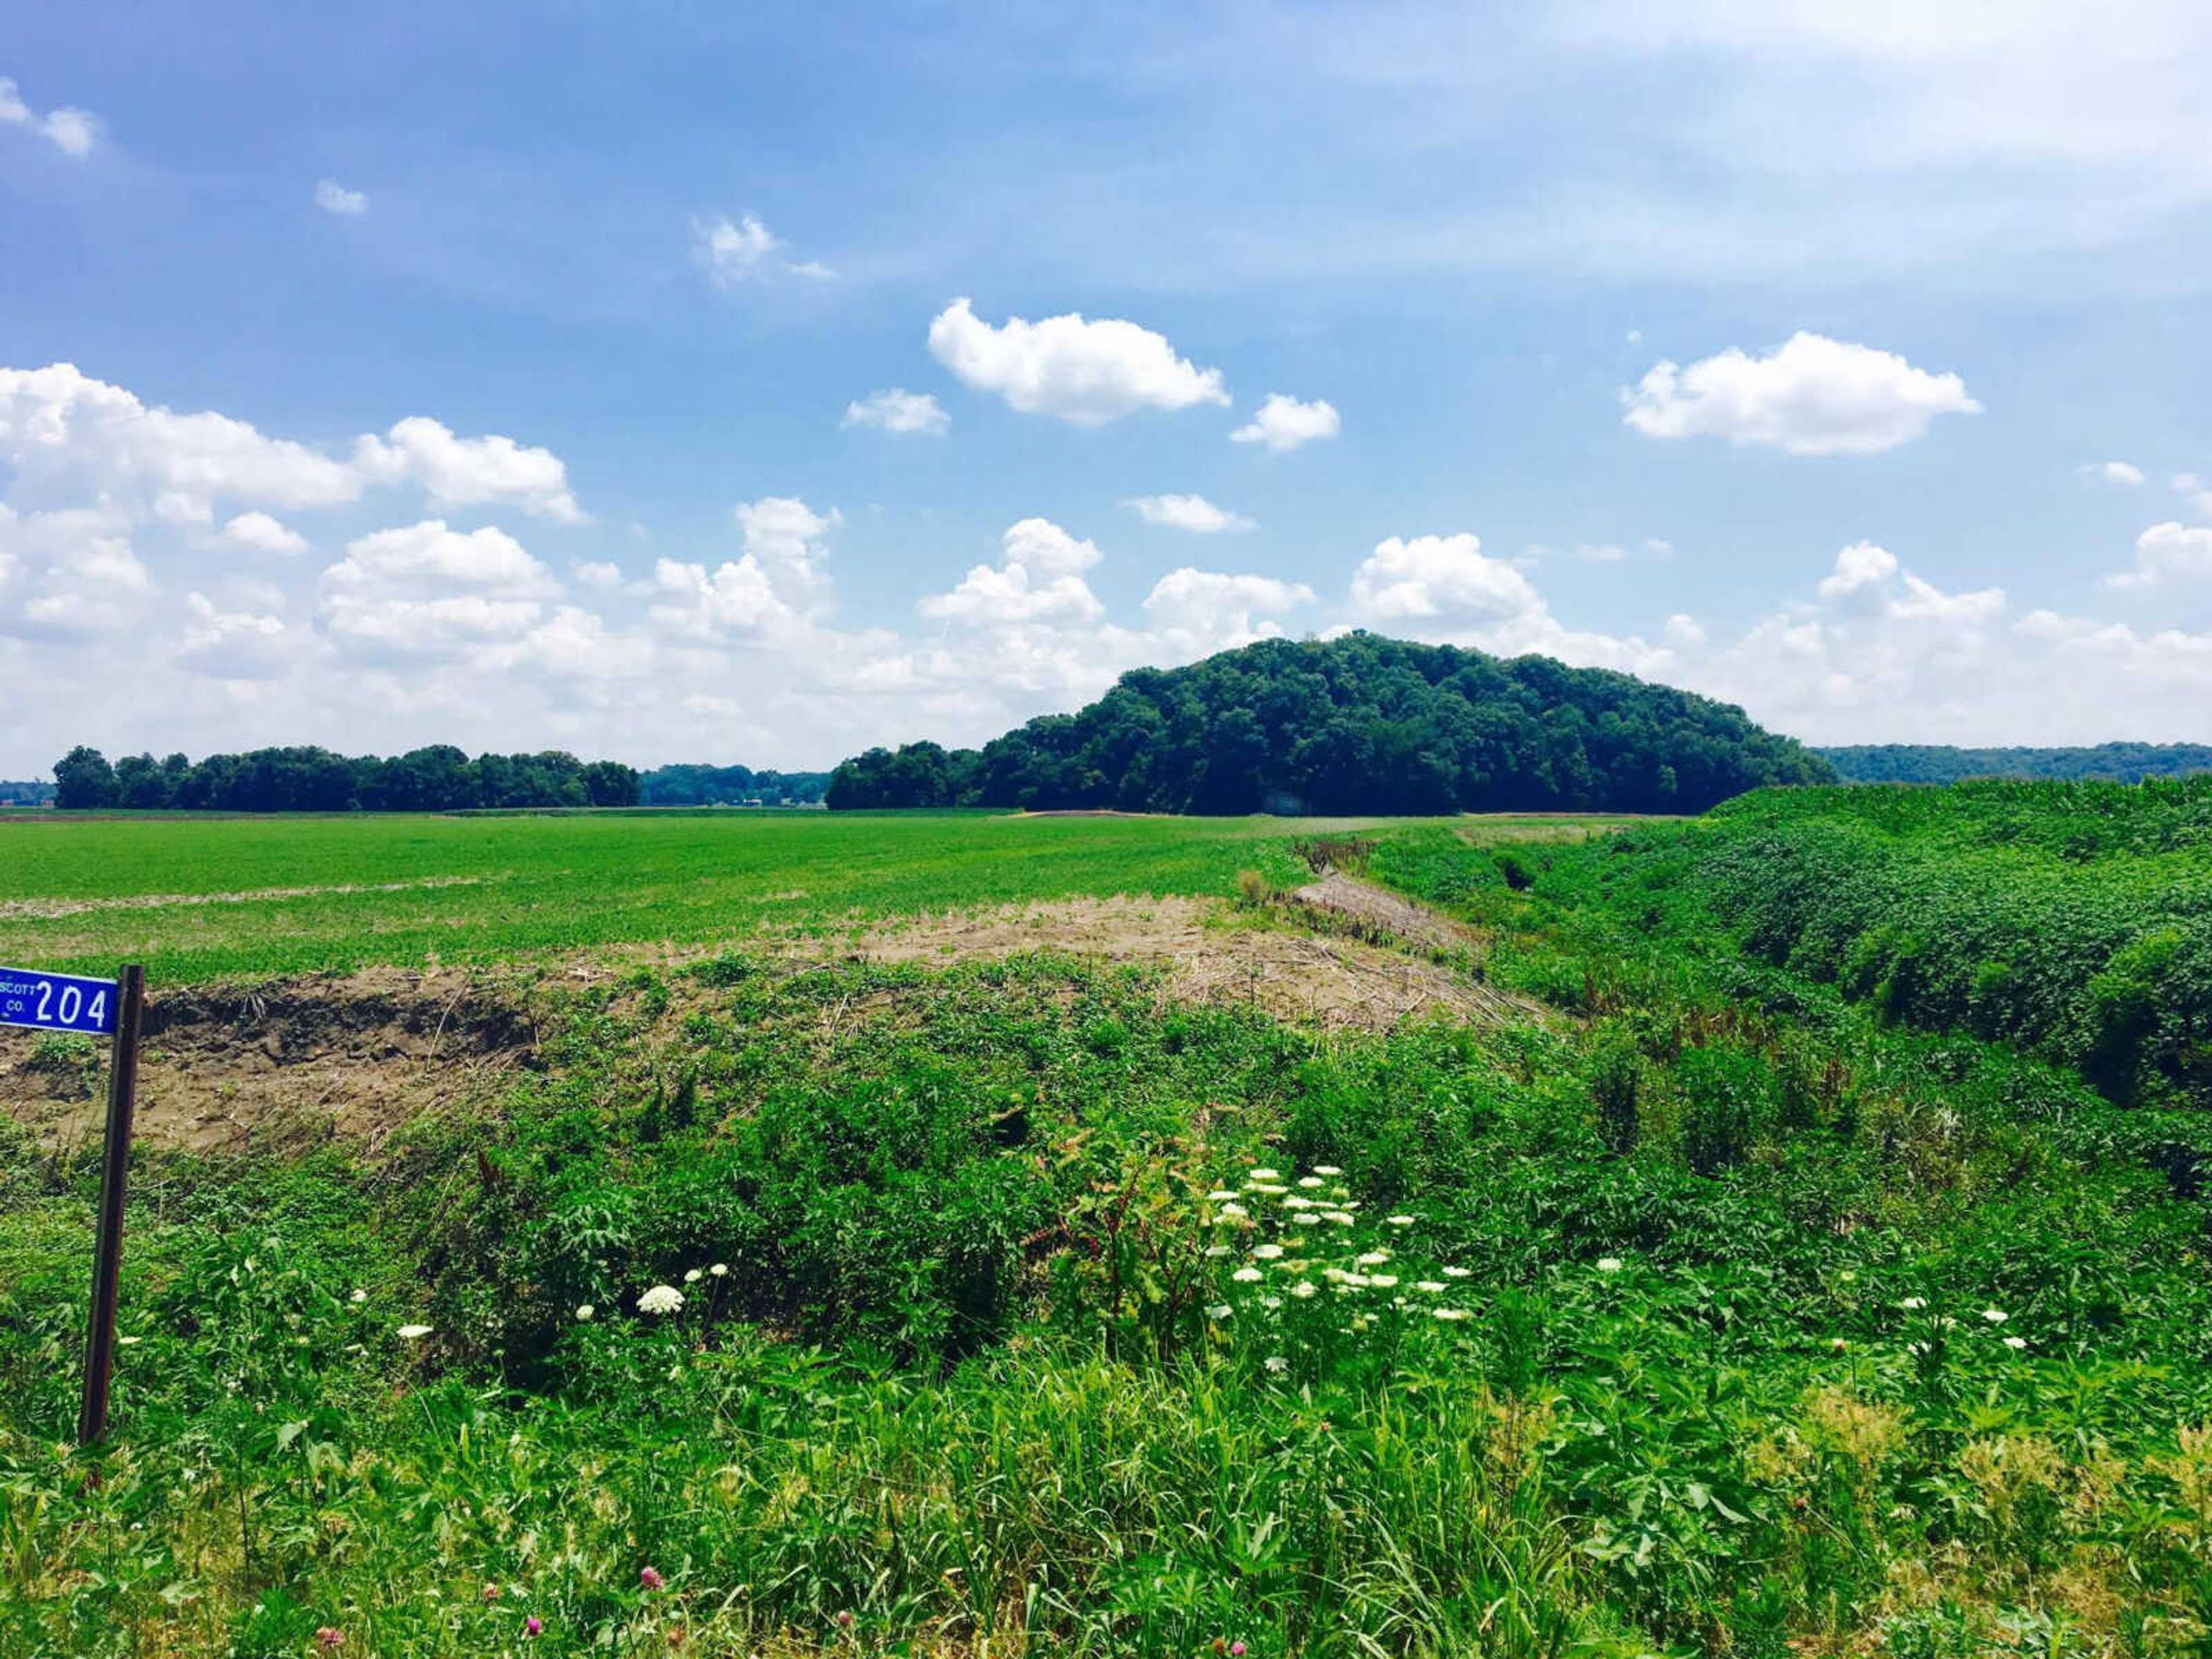 The UFO is said to have landed in the field shown above nearby the Cape Girardeau Regional Airport. According to Huntington, researchers pinpointed the location and hope to begin studying the land for remains of the crash.